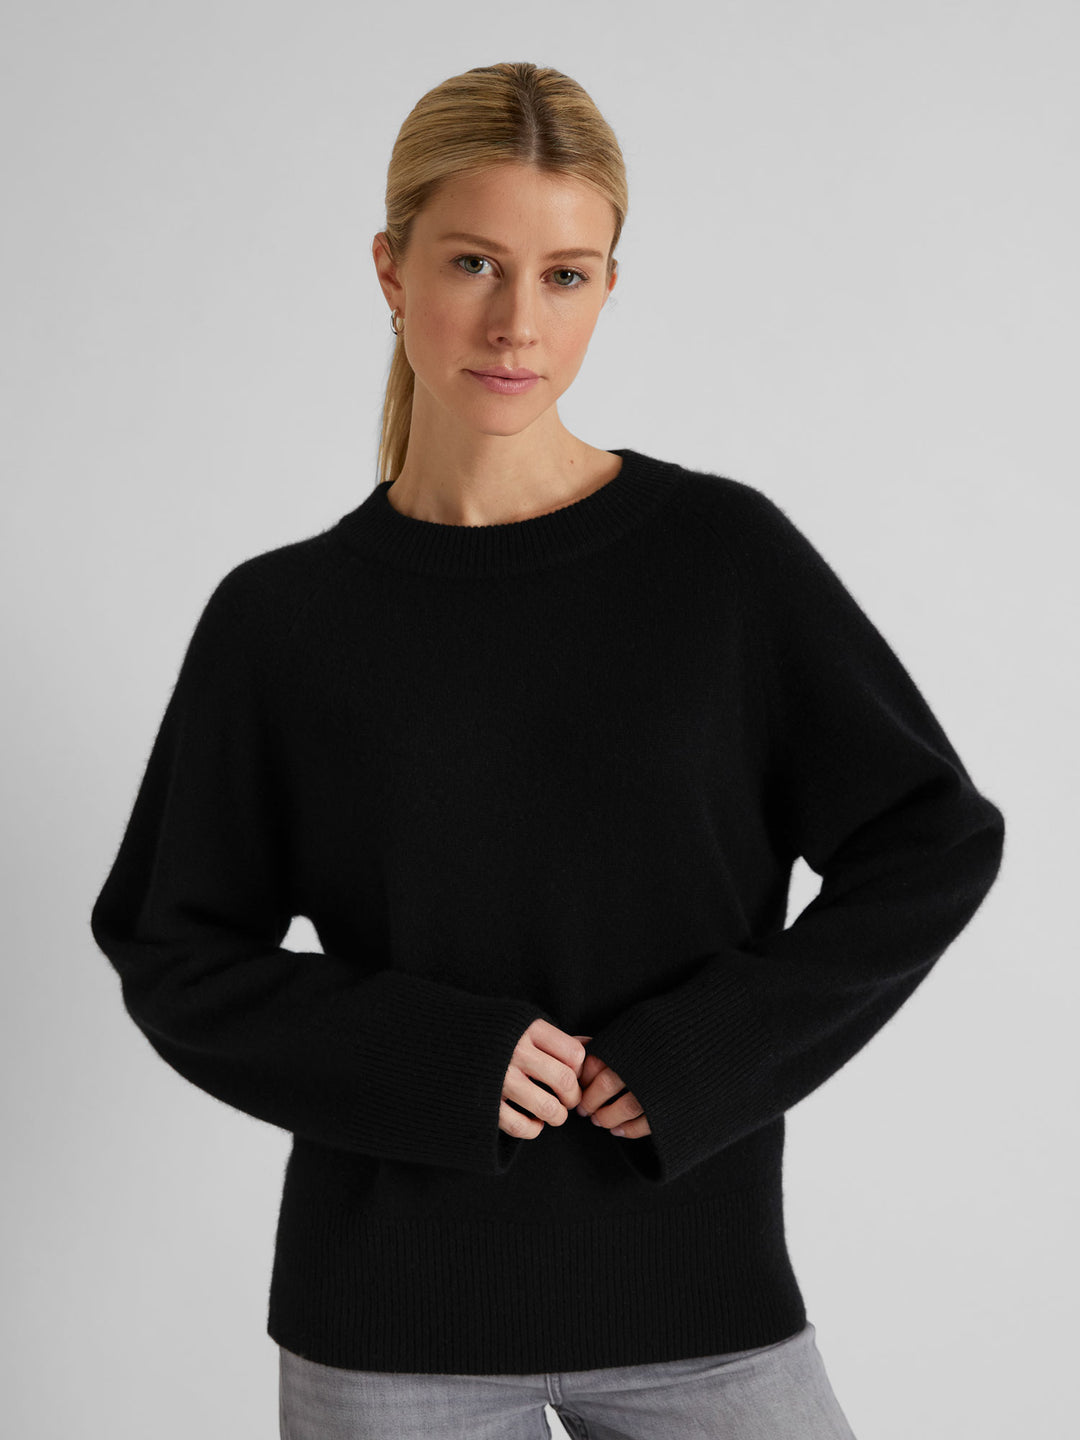 Chunky cashmere sweater "Signy" in 100% pure cashmere. Scandinavian design by Kashmina. Color: Black.